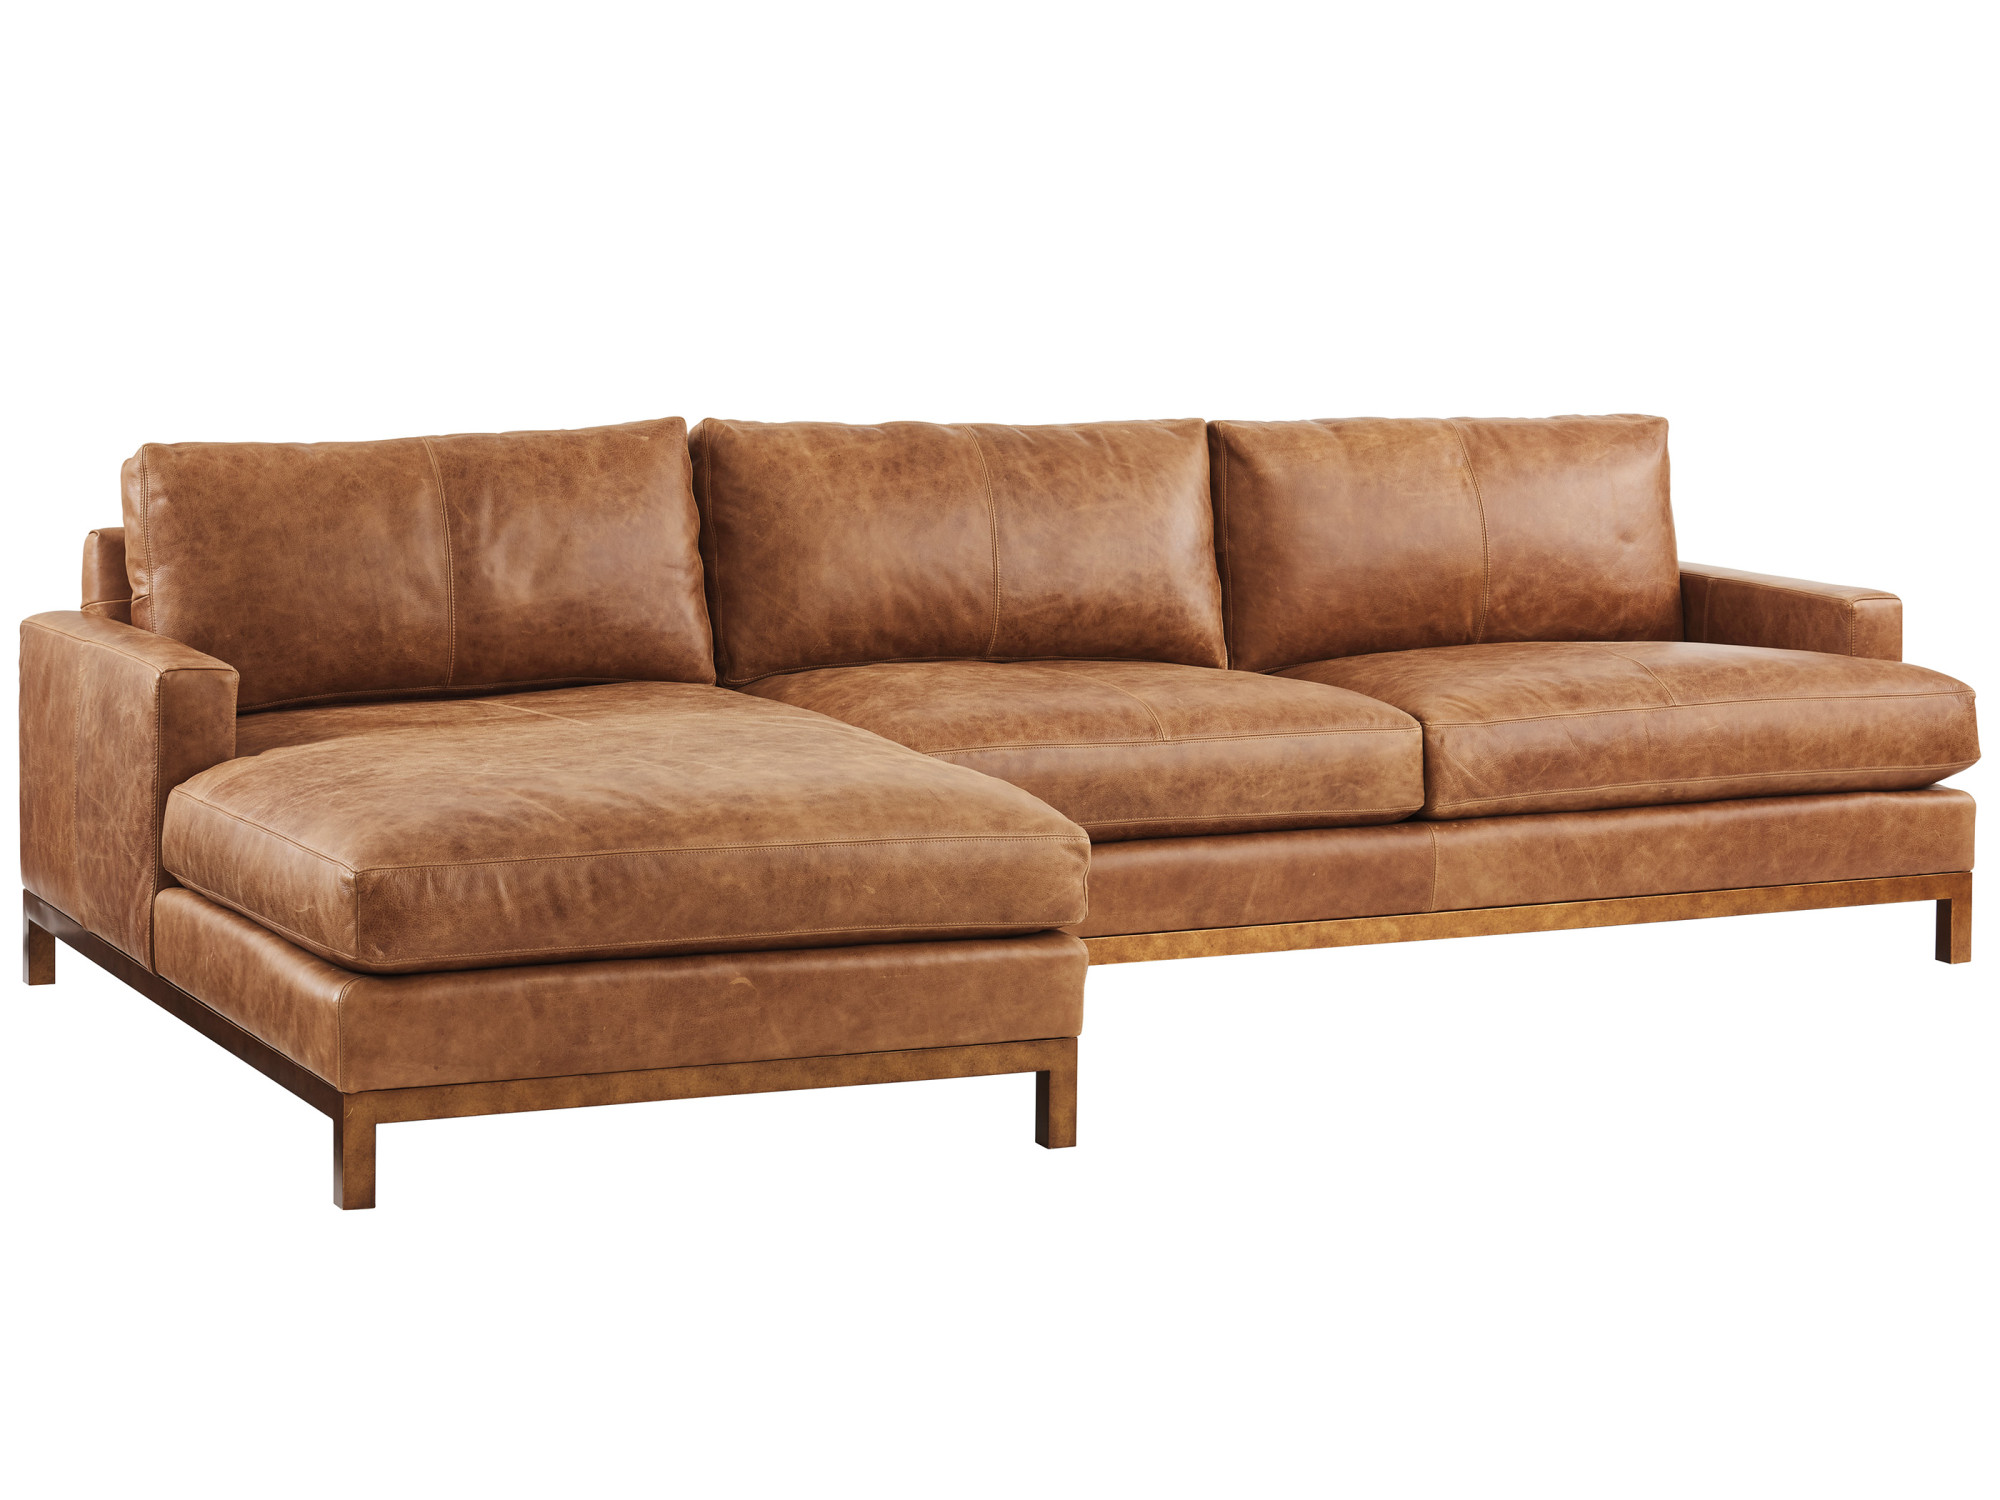 Horizon Leather Sofa Chaise Lexington, Leather Sofa Sectional With Chaise